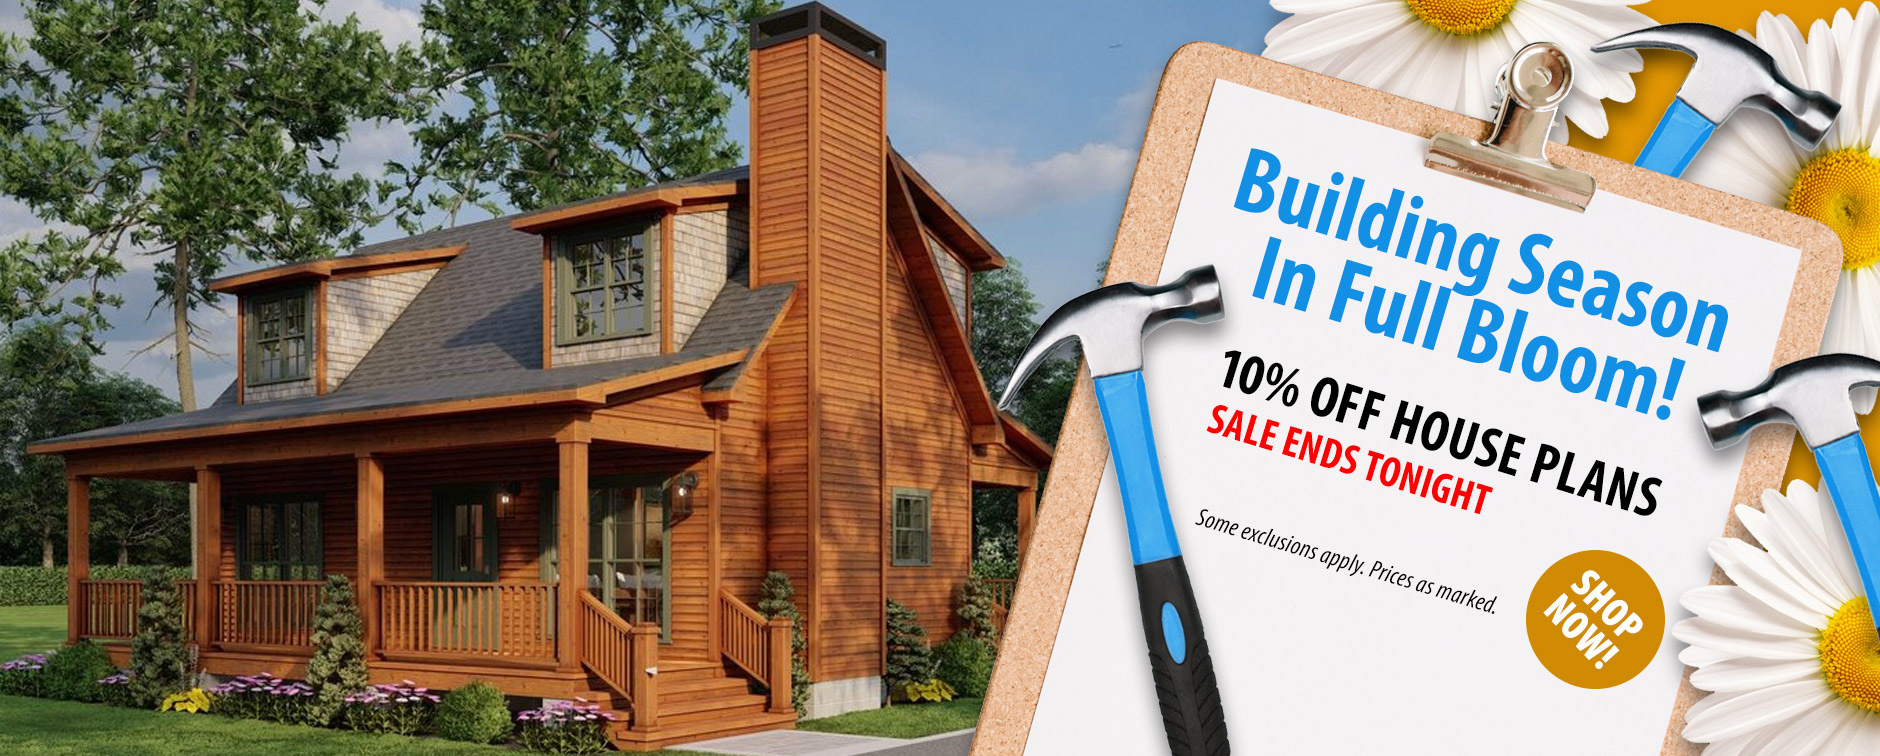 Get 10% Off Dream House Plans - Farmhouse, Modern, More - Offer Ends Tonight